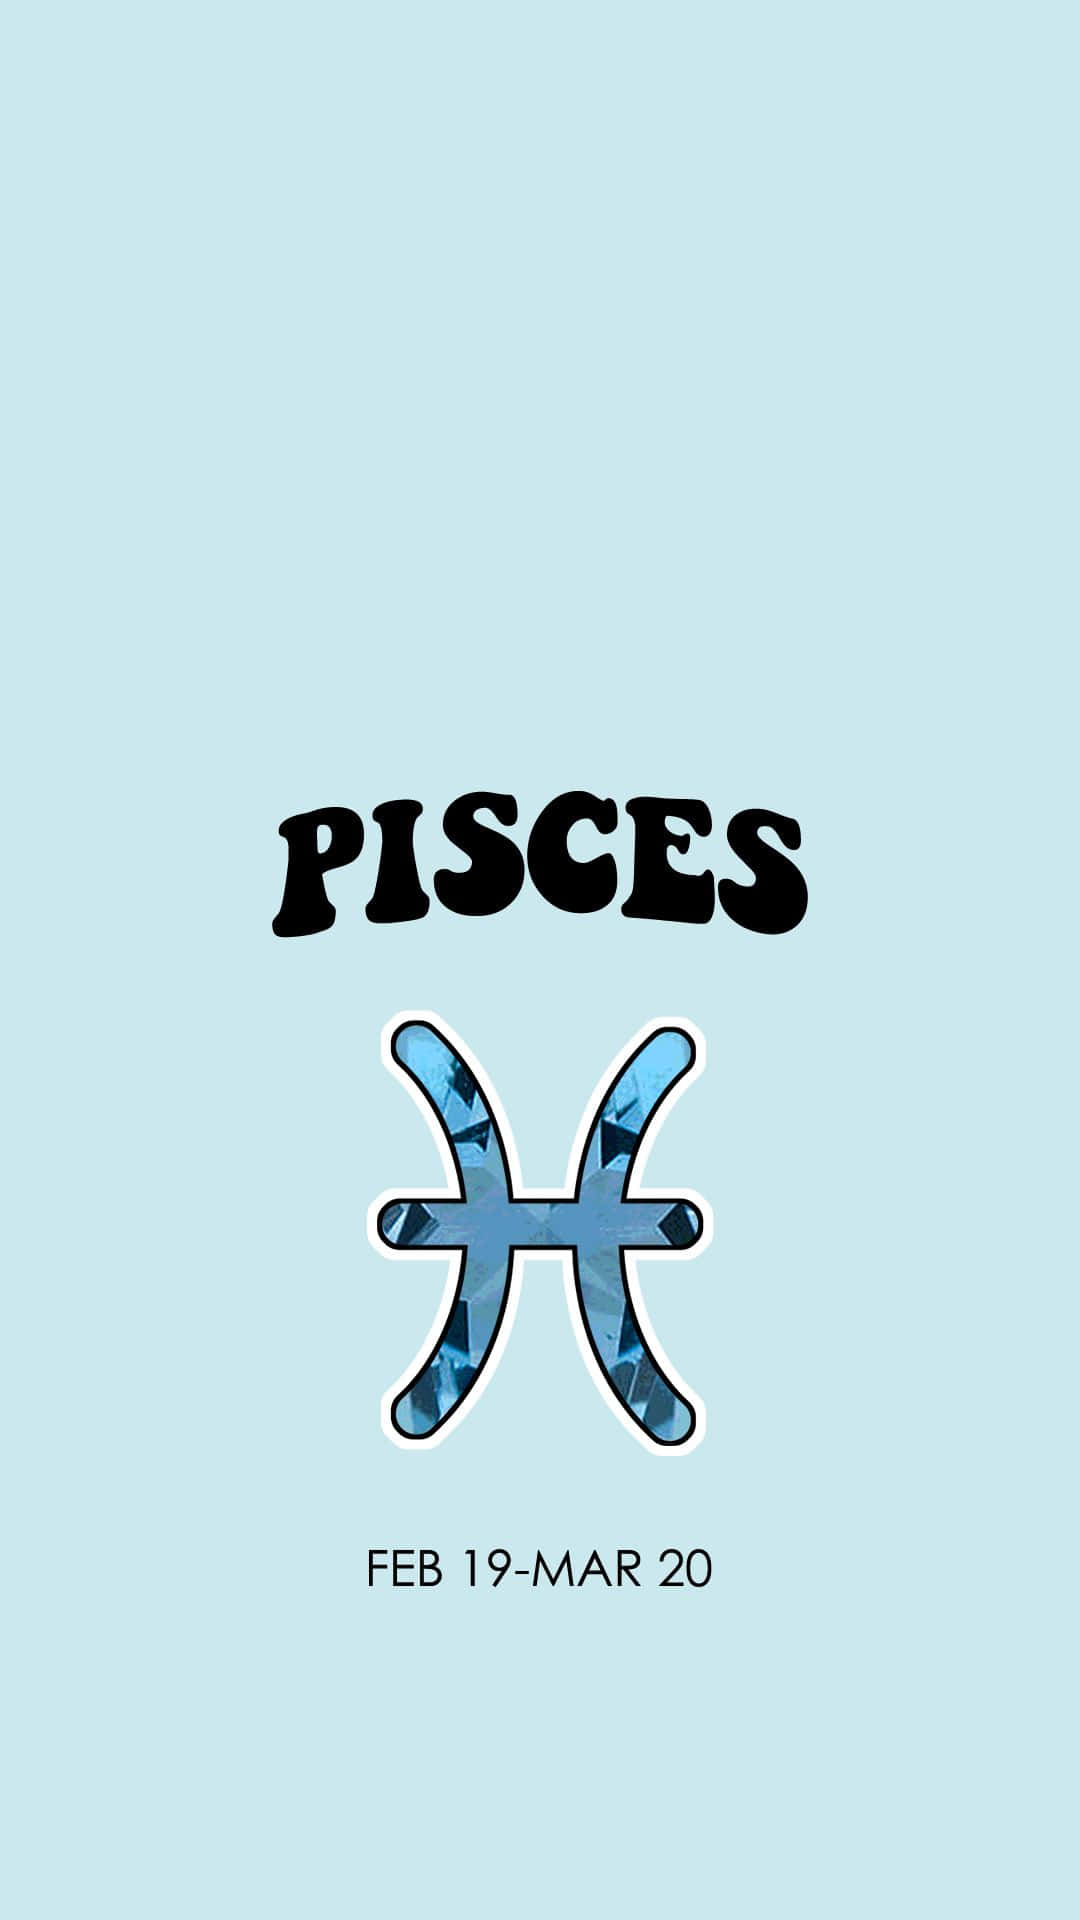 Download Mesmerizing Illustration of the Pisces Zodiac Sign